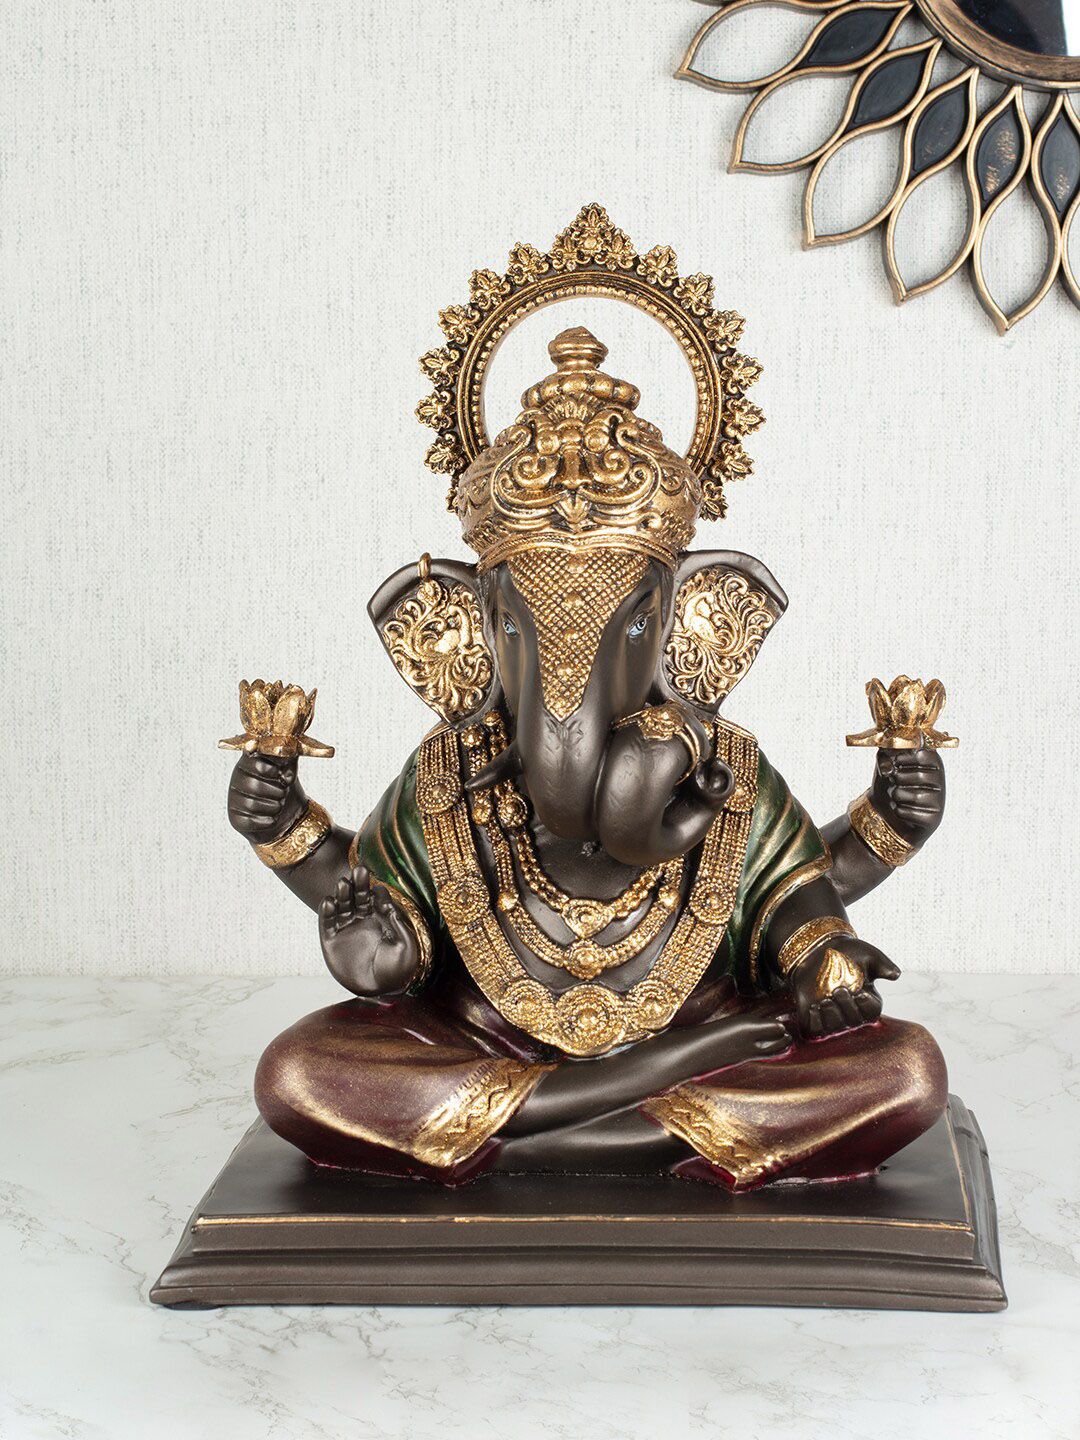 HomeTown Charcoal & Copper Polyresin Embellished Ganesha Idol Price in India